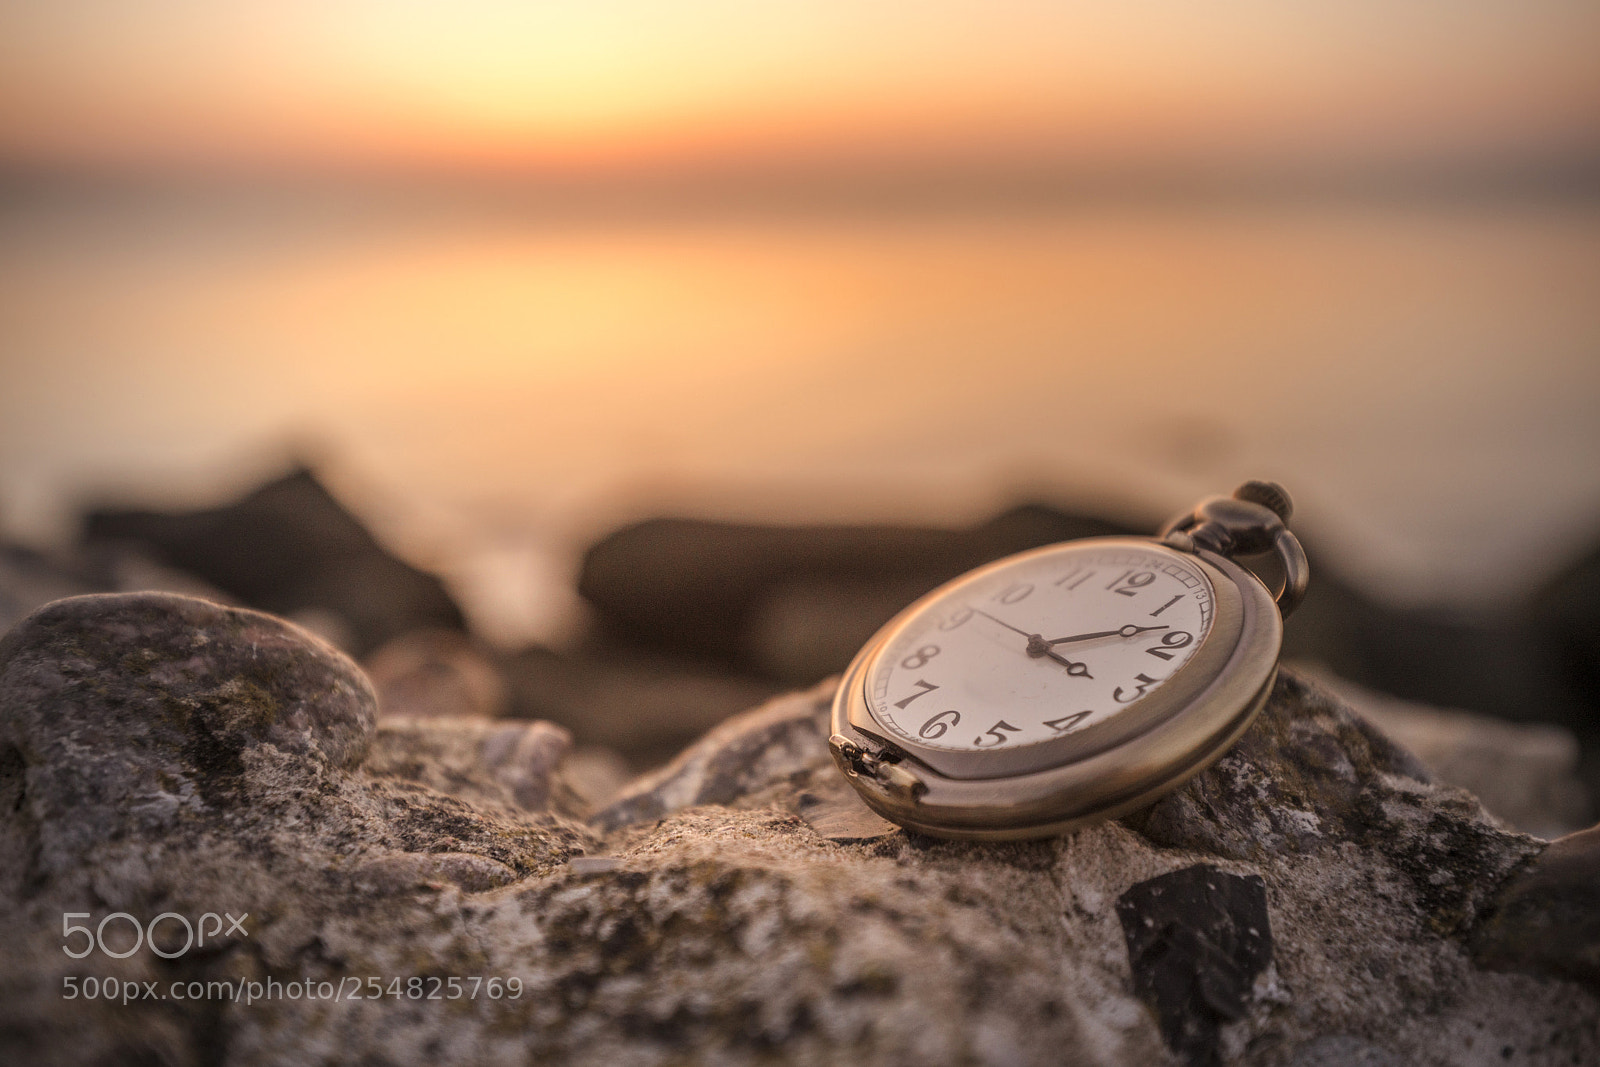 Sony a99 II sample photo. Antique watch on a photography